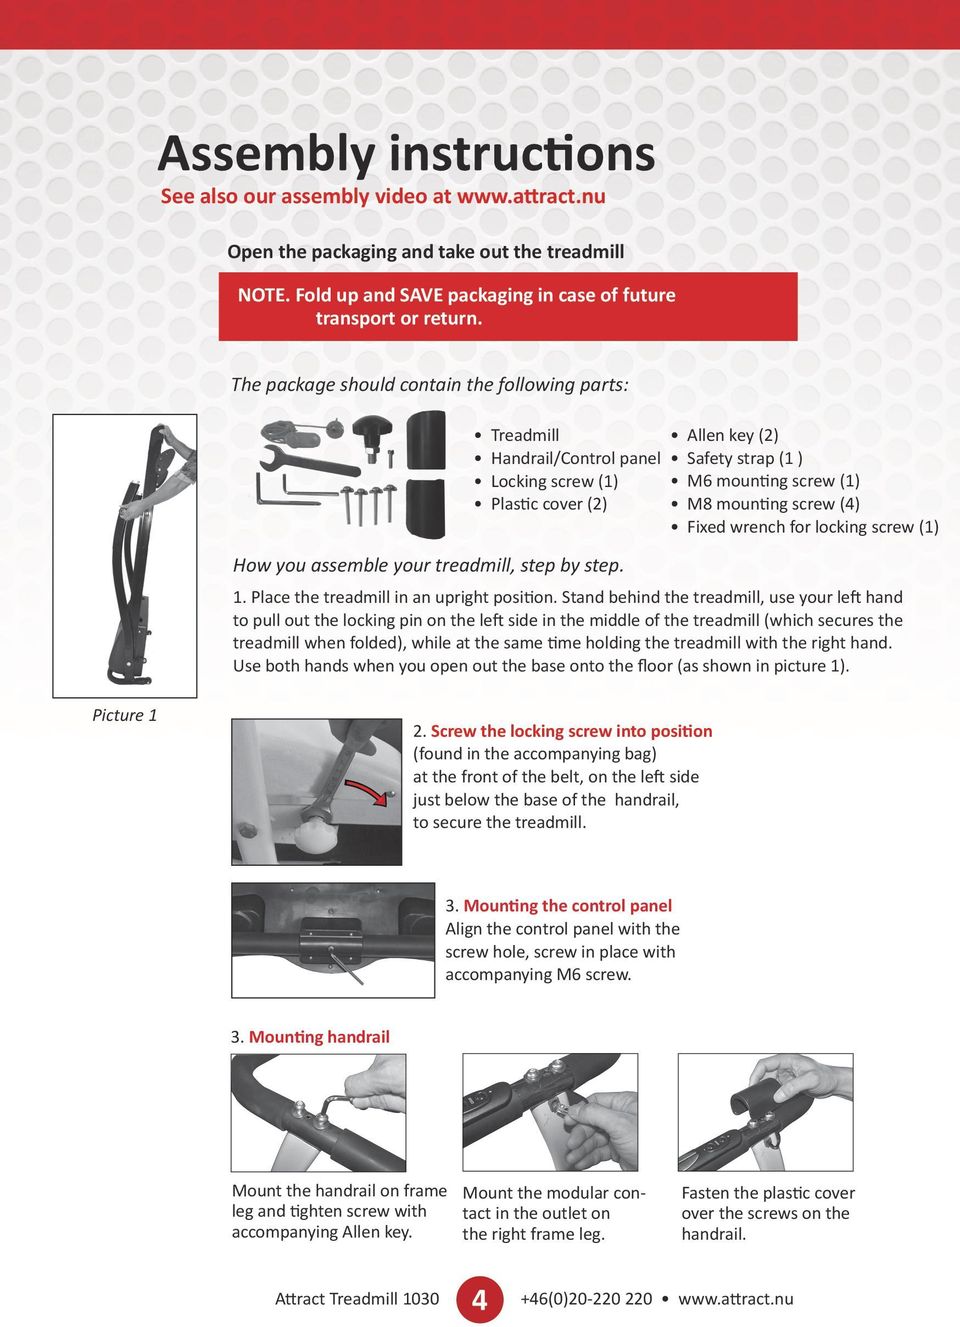 wrench for locking screw () How you assemble your treadmill, step by step.. Place the treadmill in an upright position.